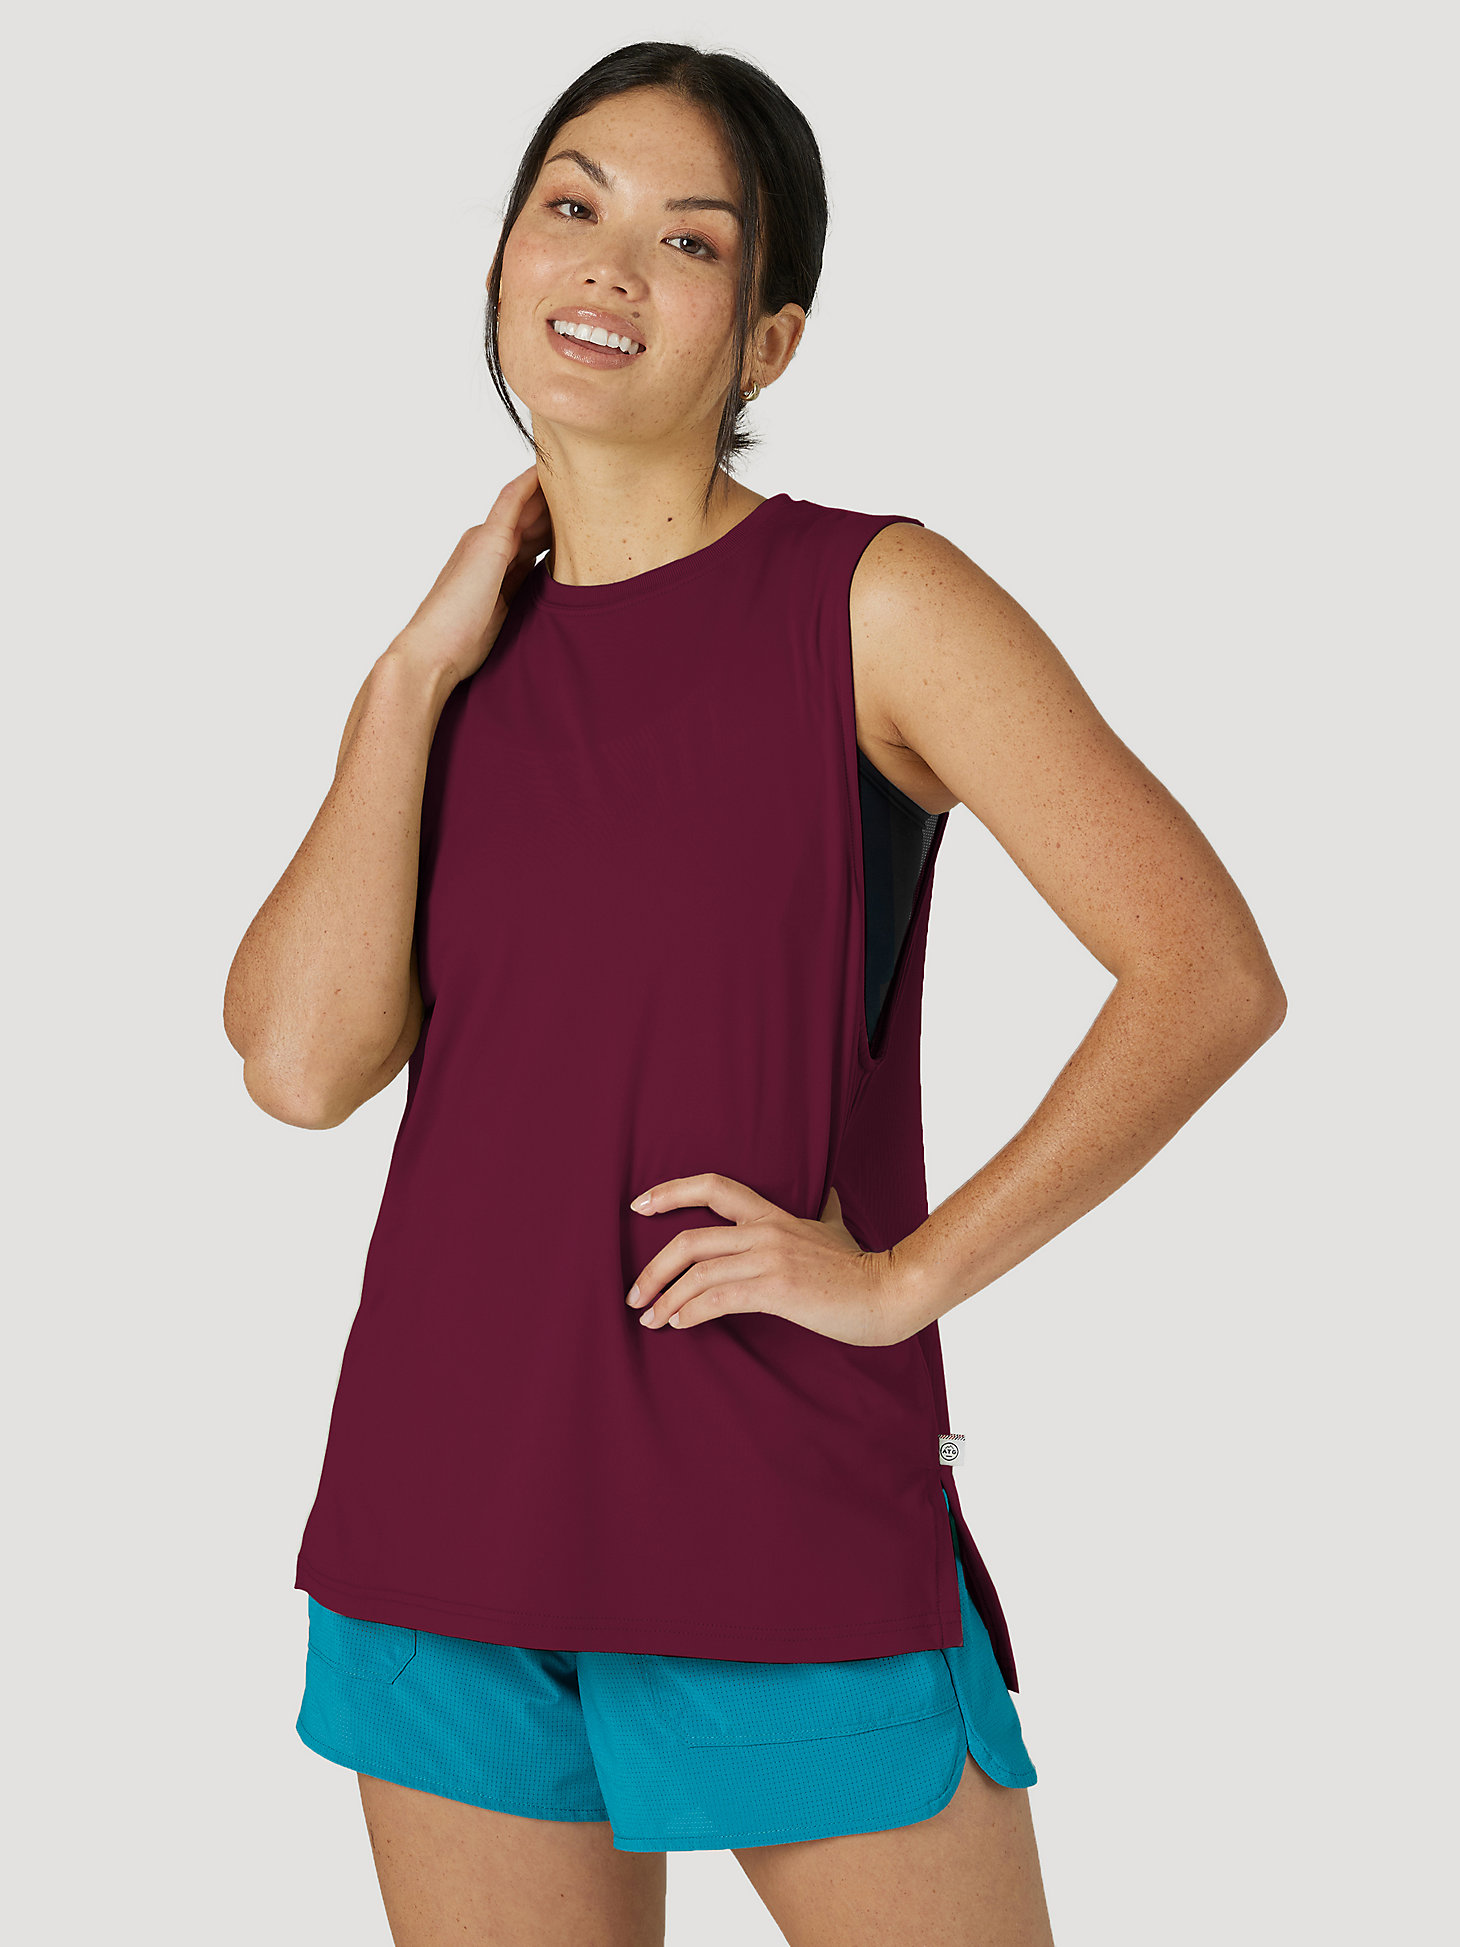 ATG By Wrangler™ Women's Relaxed Fit Tank in Fig alternative view 1